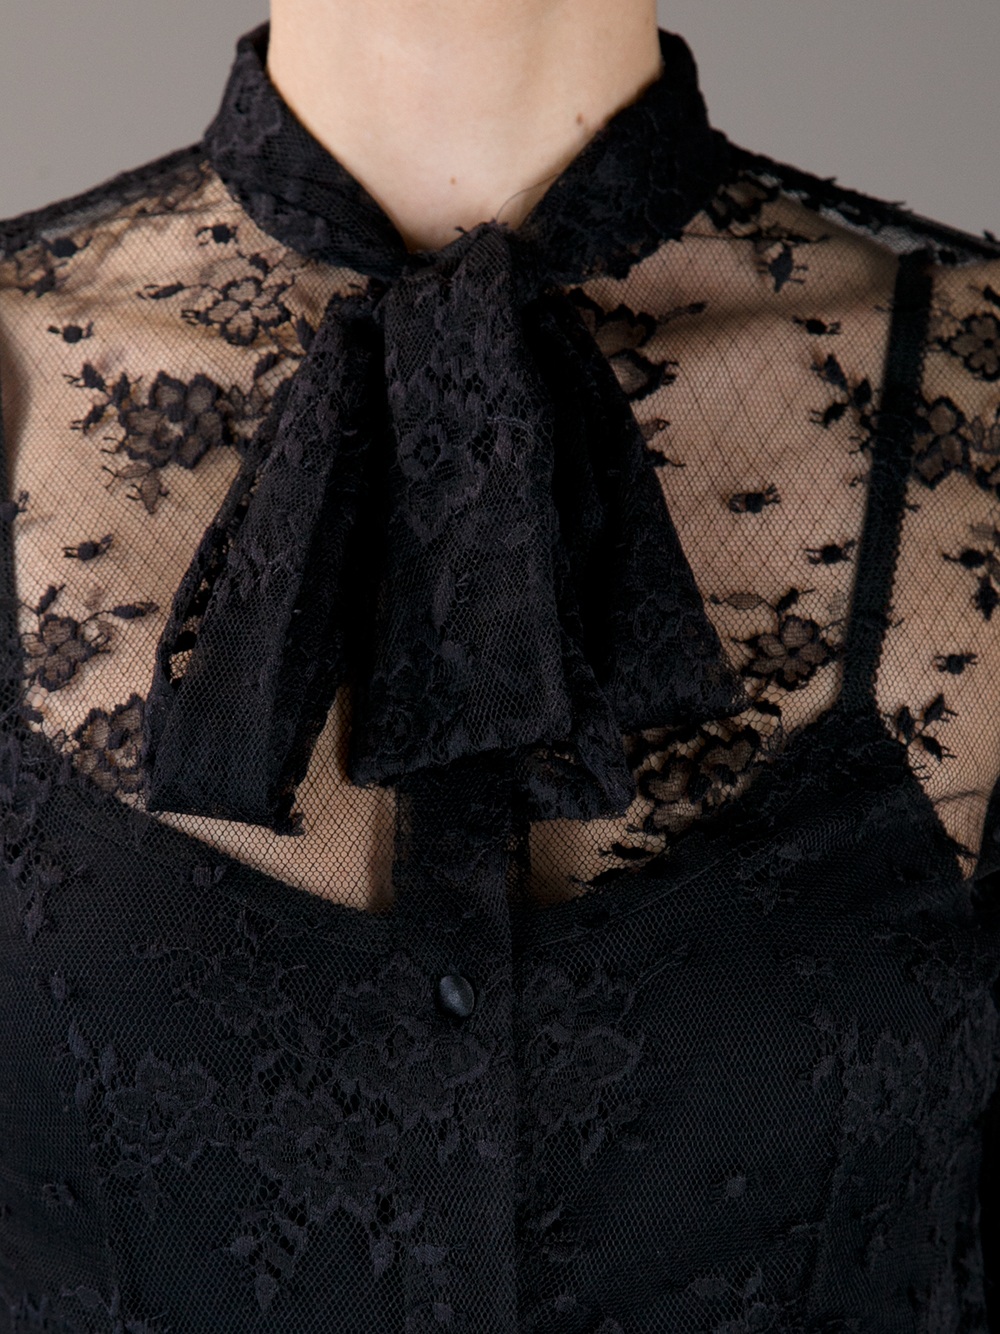 Dolce & Gabbana Sheer Lace Blouse in Black - Lyst